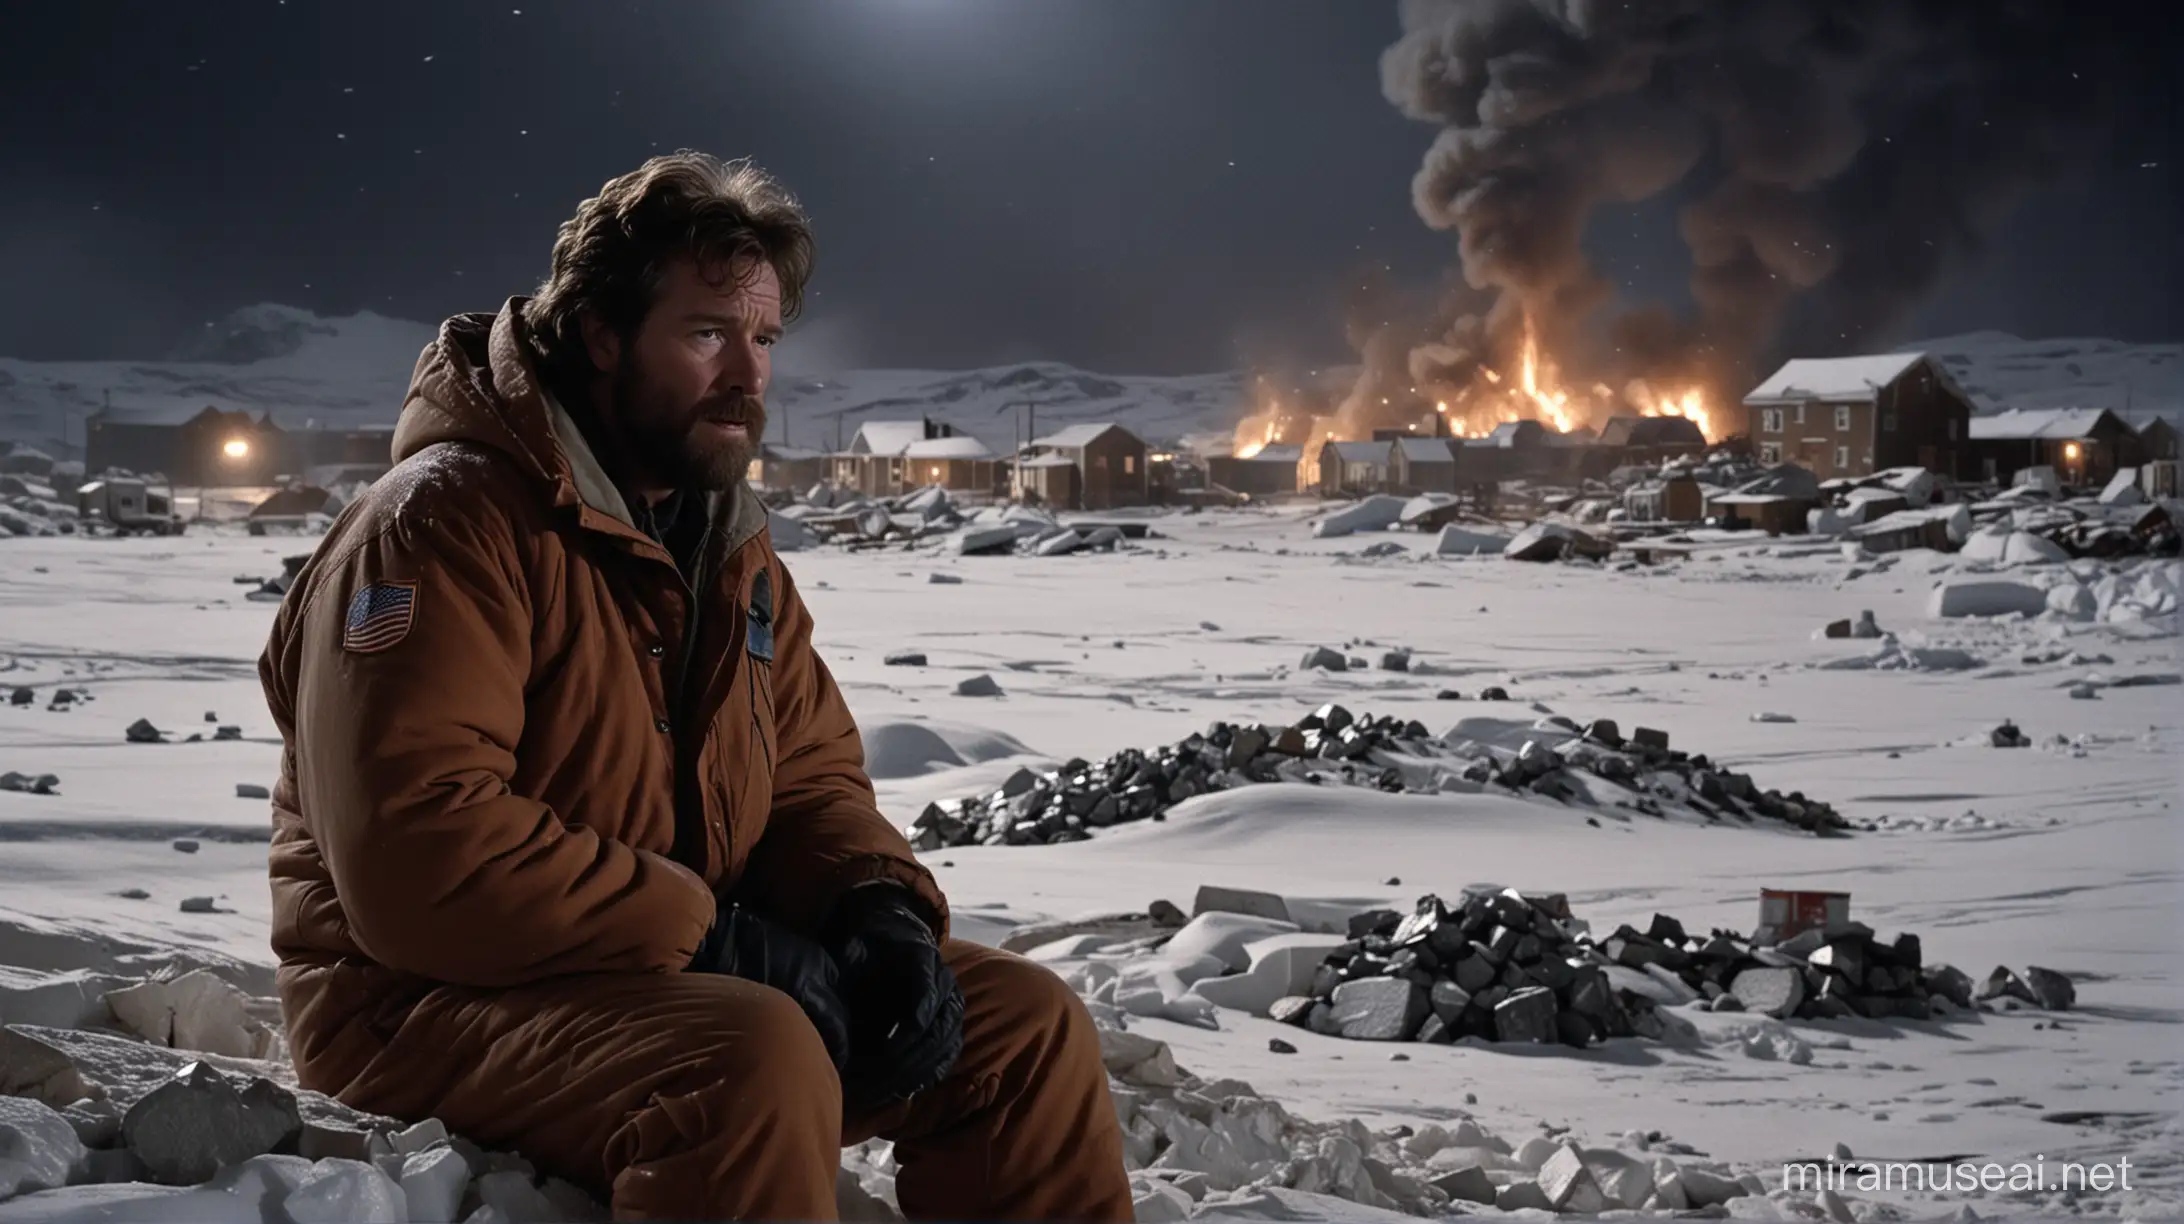 Cinematic Still The Thing by John Carpenter Kurt Russell and Companion Braving the Antarctic Night